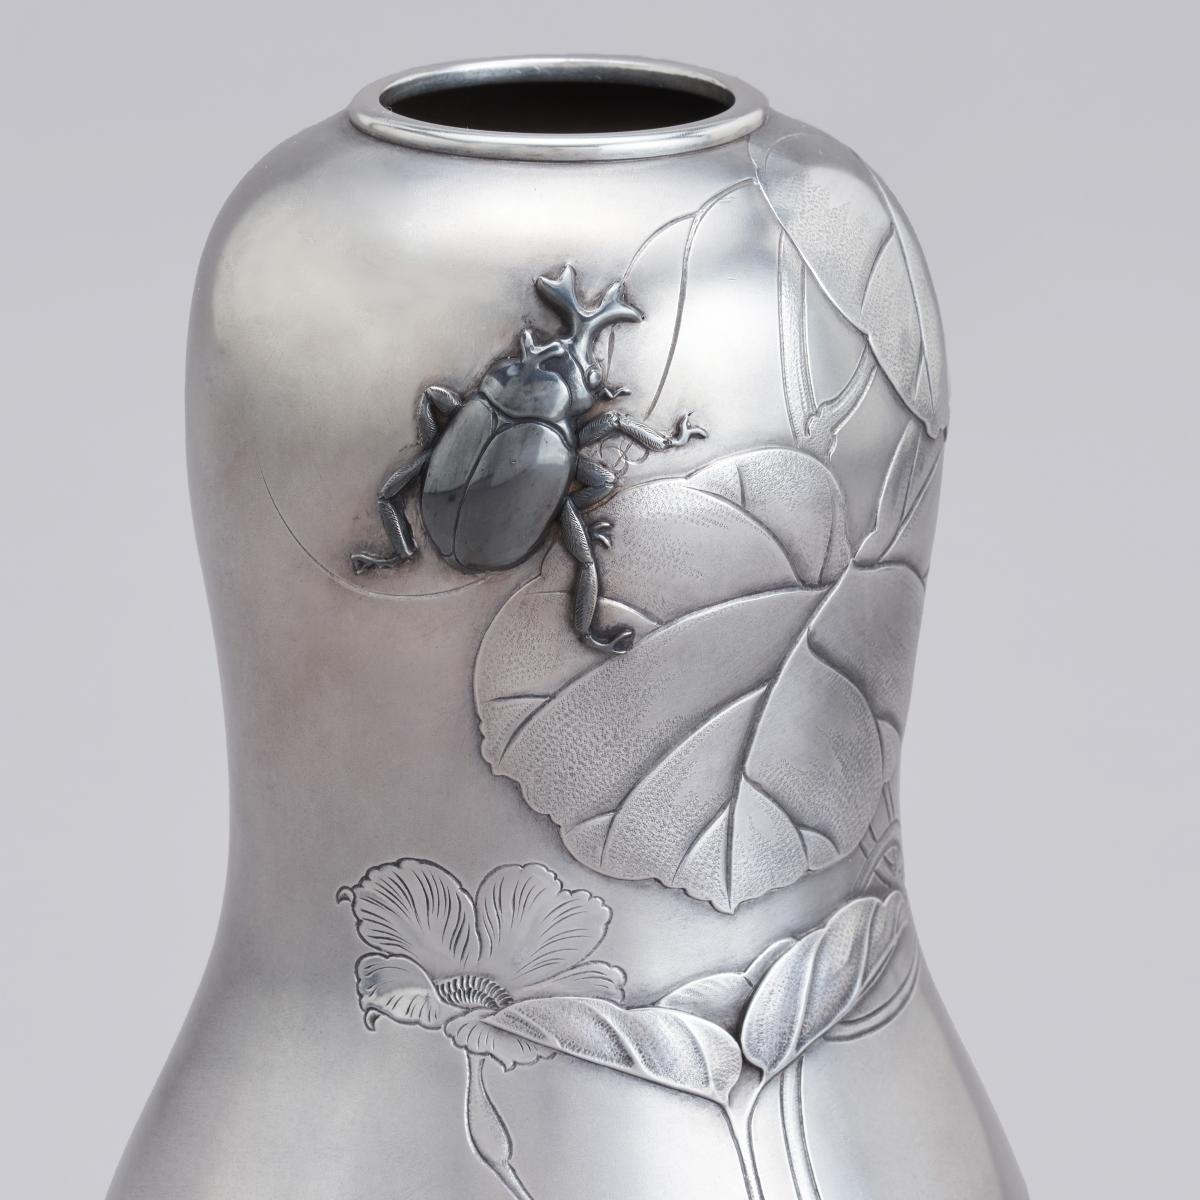 Japanese silver vase with stag beetle signed Hojo and Chorakusai, Showa period